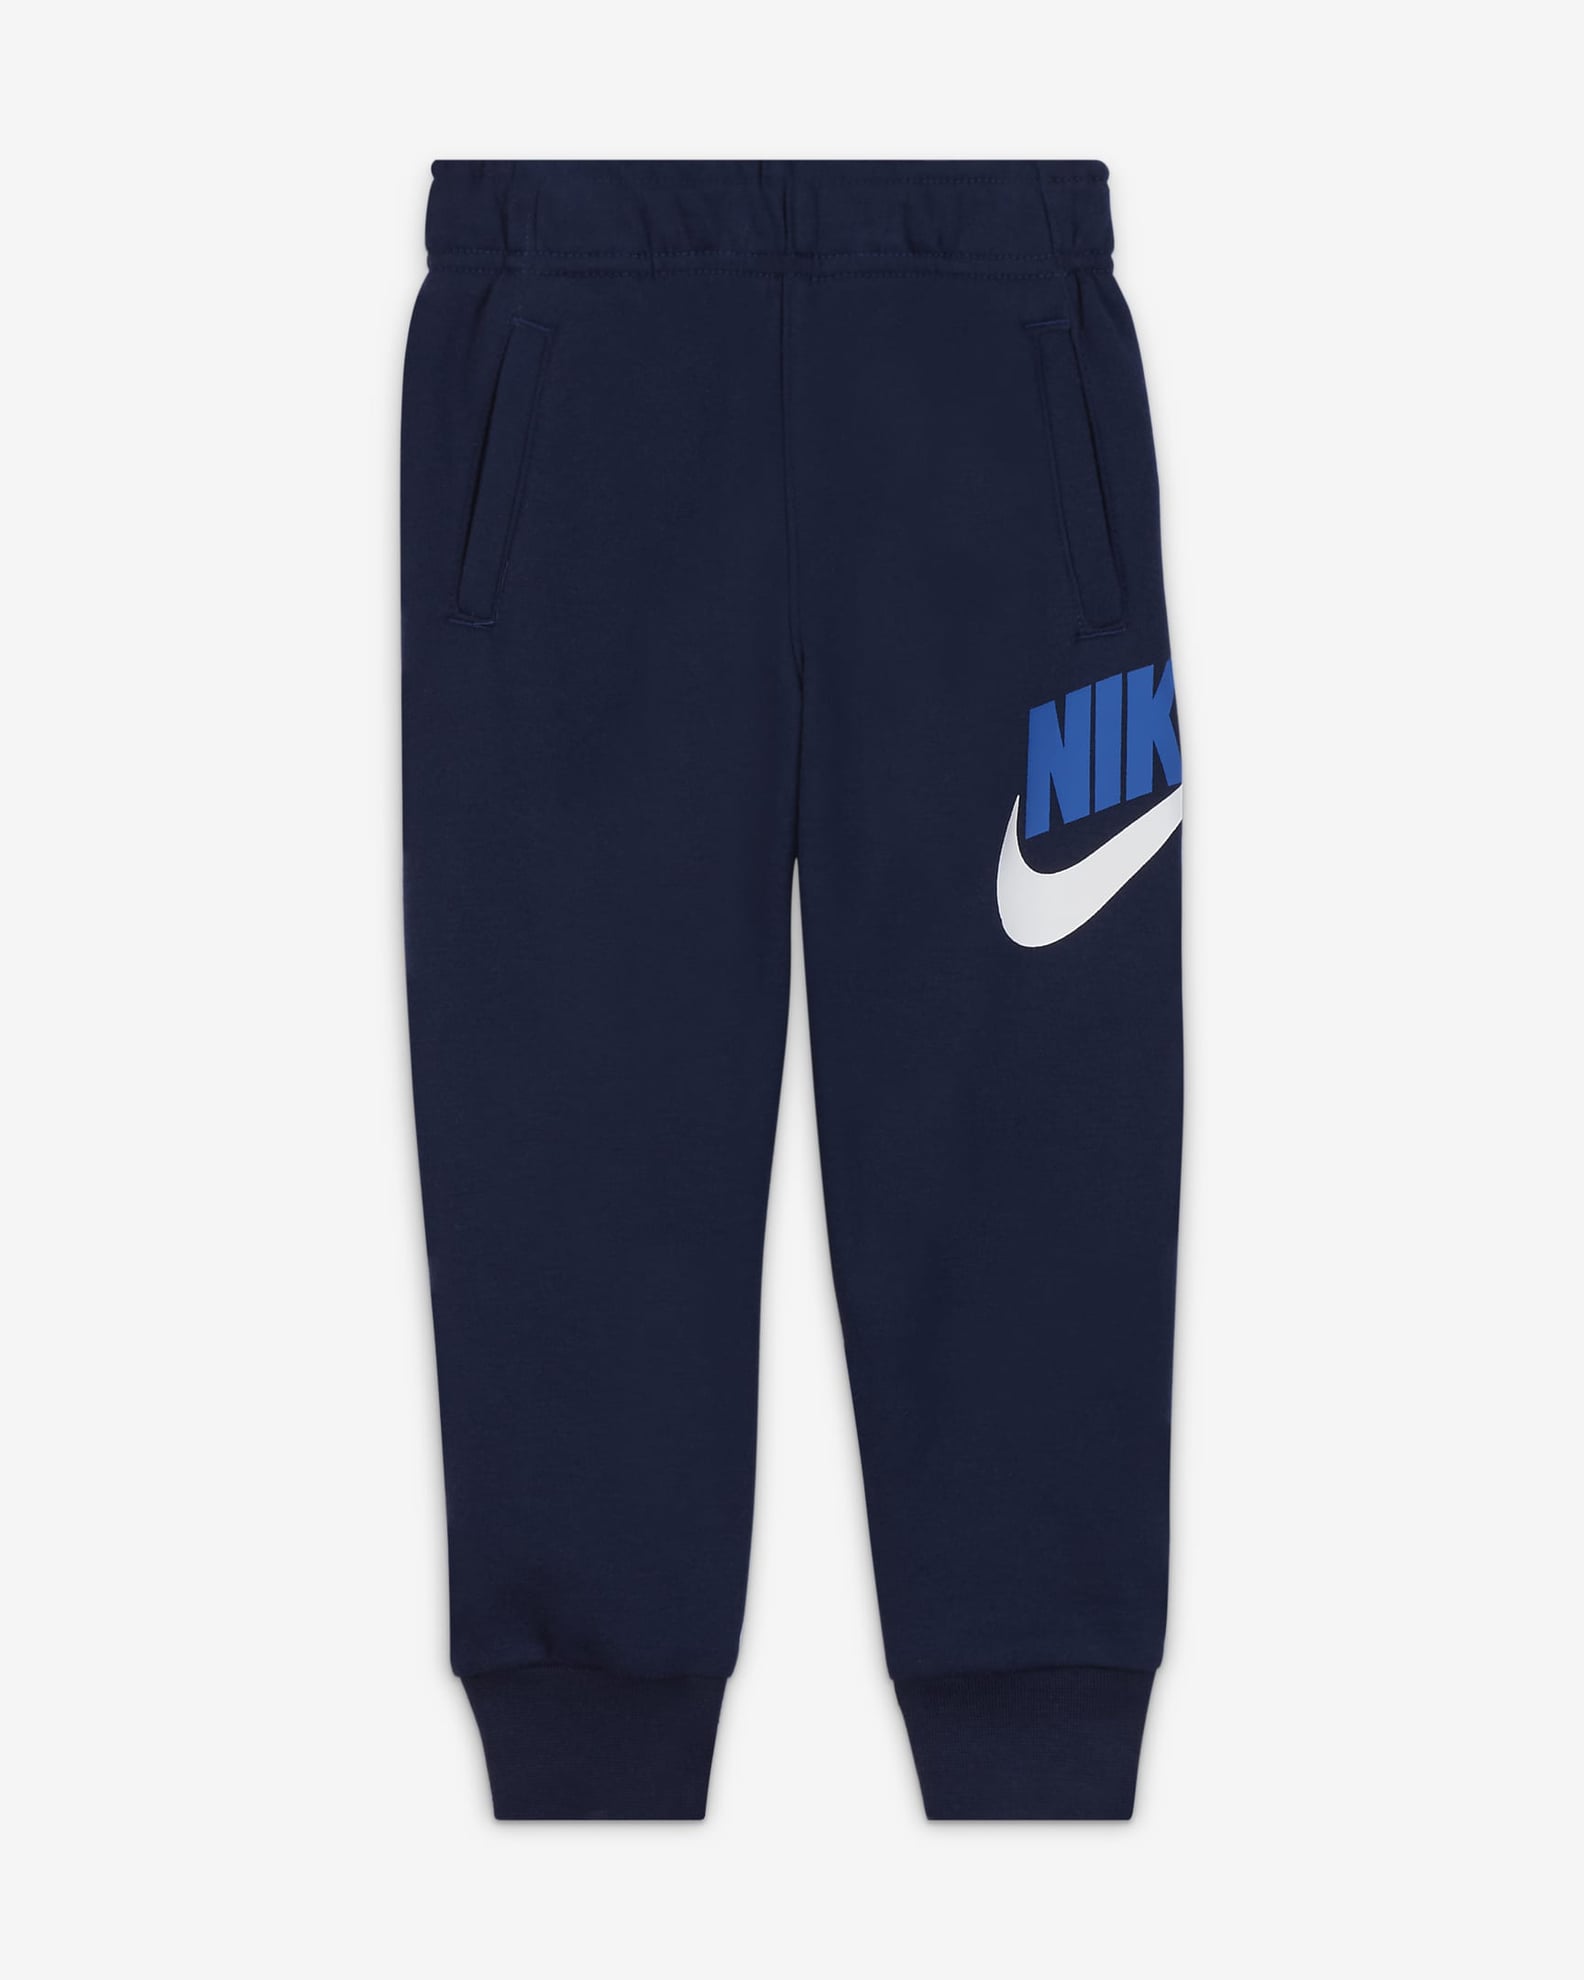 Cute and Comfy Nike Shirts, Shoes, and Sweats For Toddlers | POPSUGAR ...